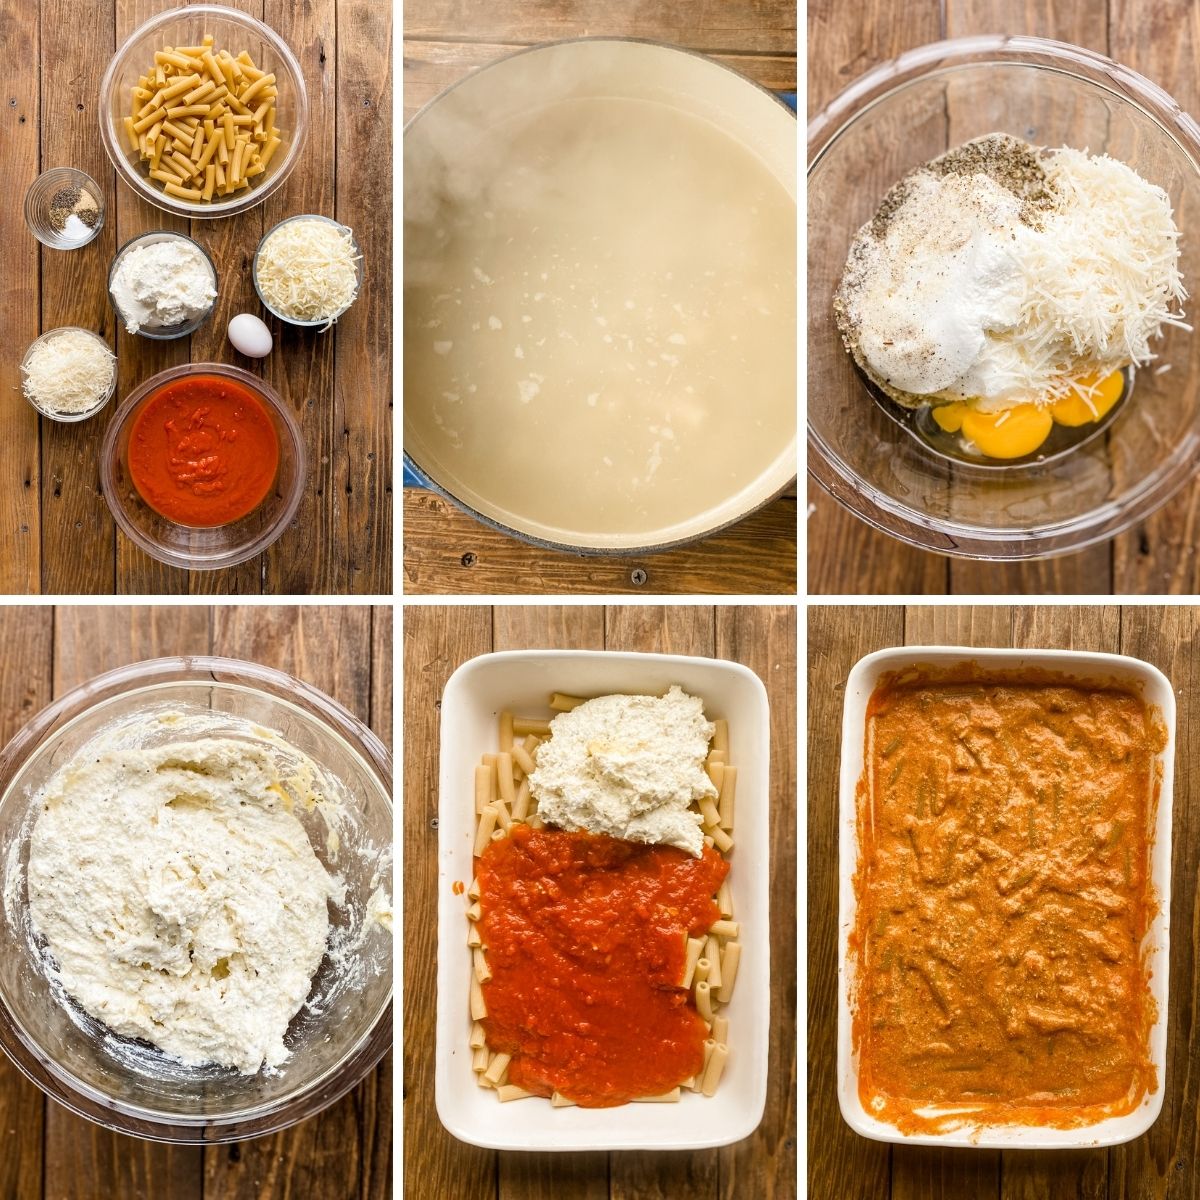 step by step collage showing how to make gluten-free baked ziti.